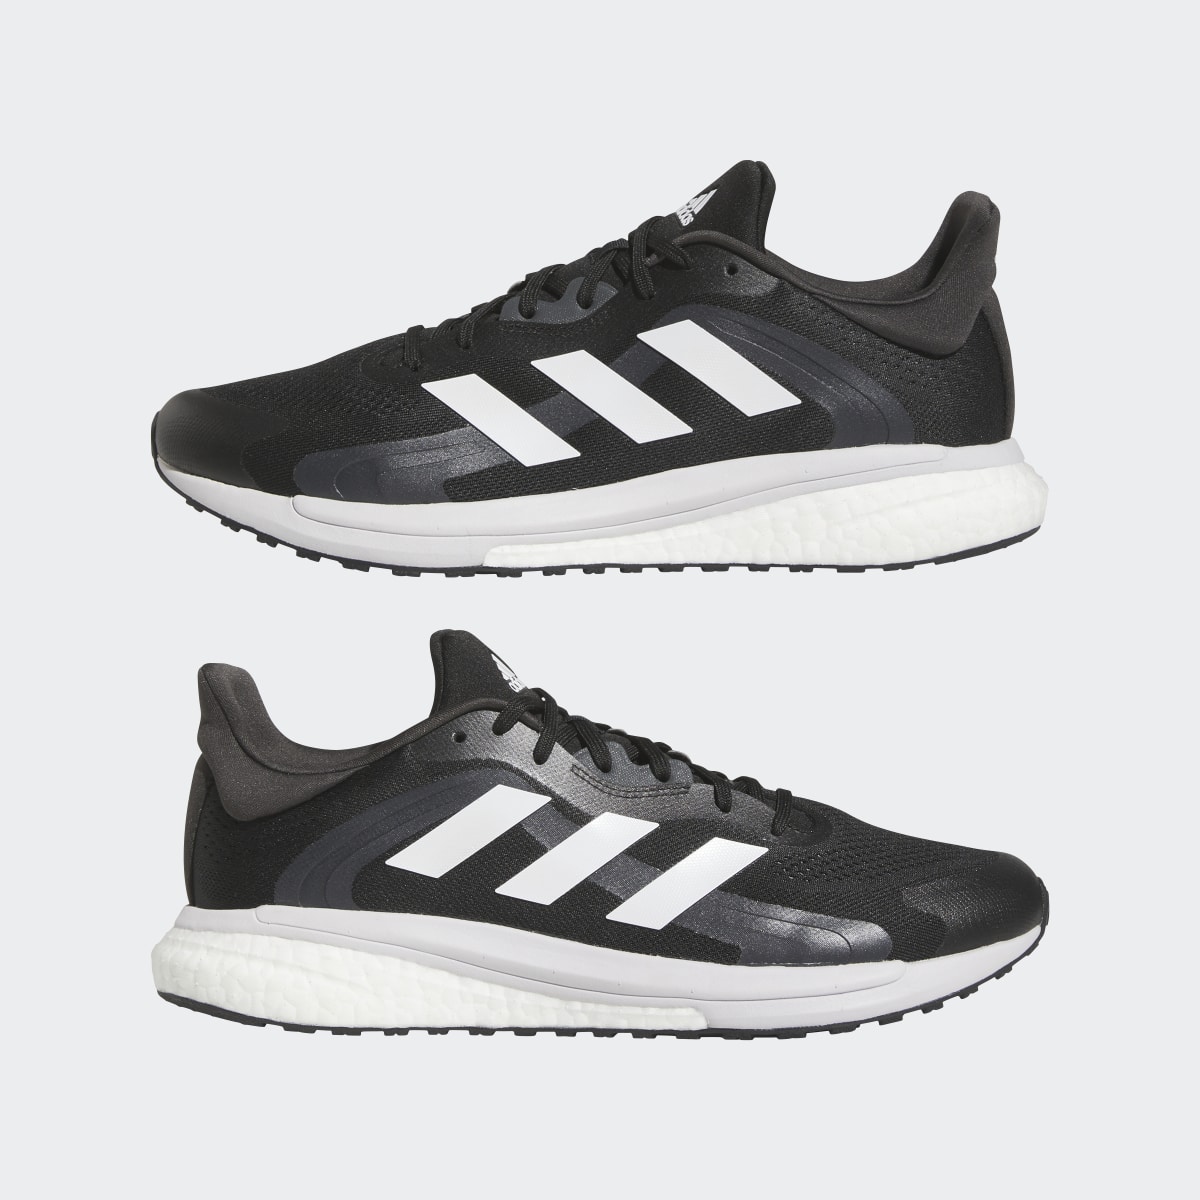 Adidas Sapatilhas SolarGlide 4 ST. 12